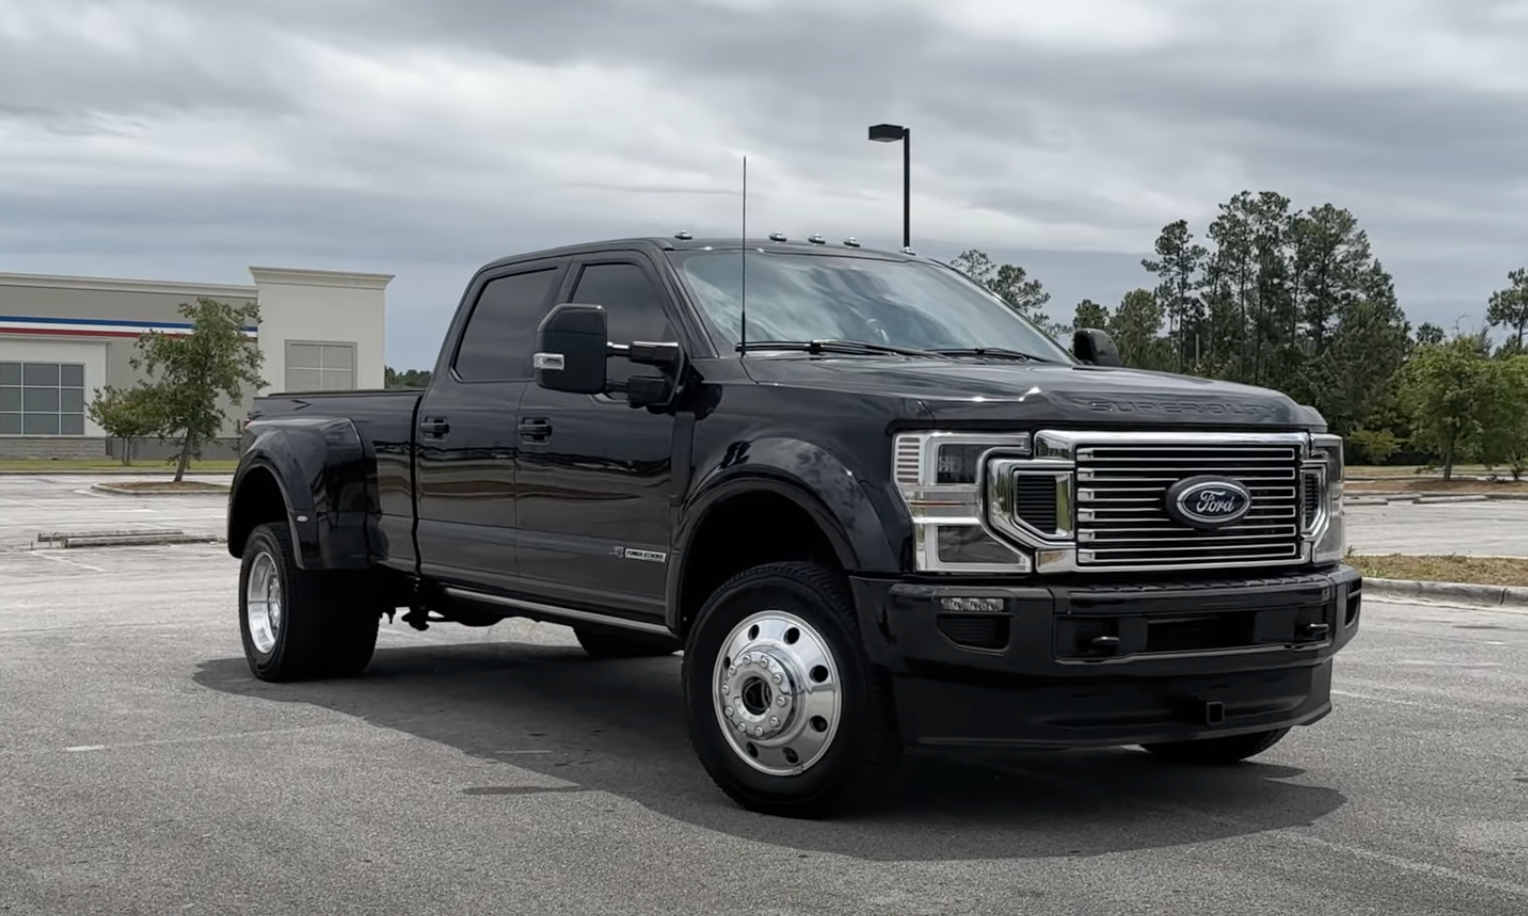 A black Ford F450 outfitted for RV towing